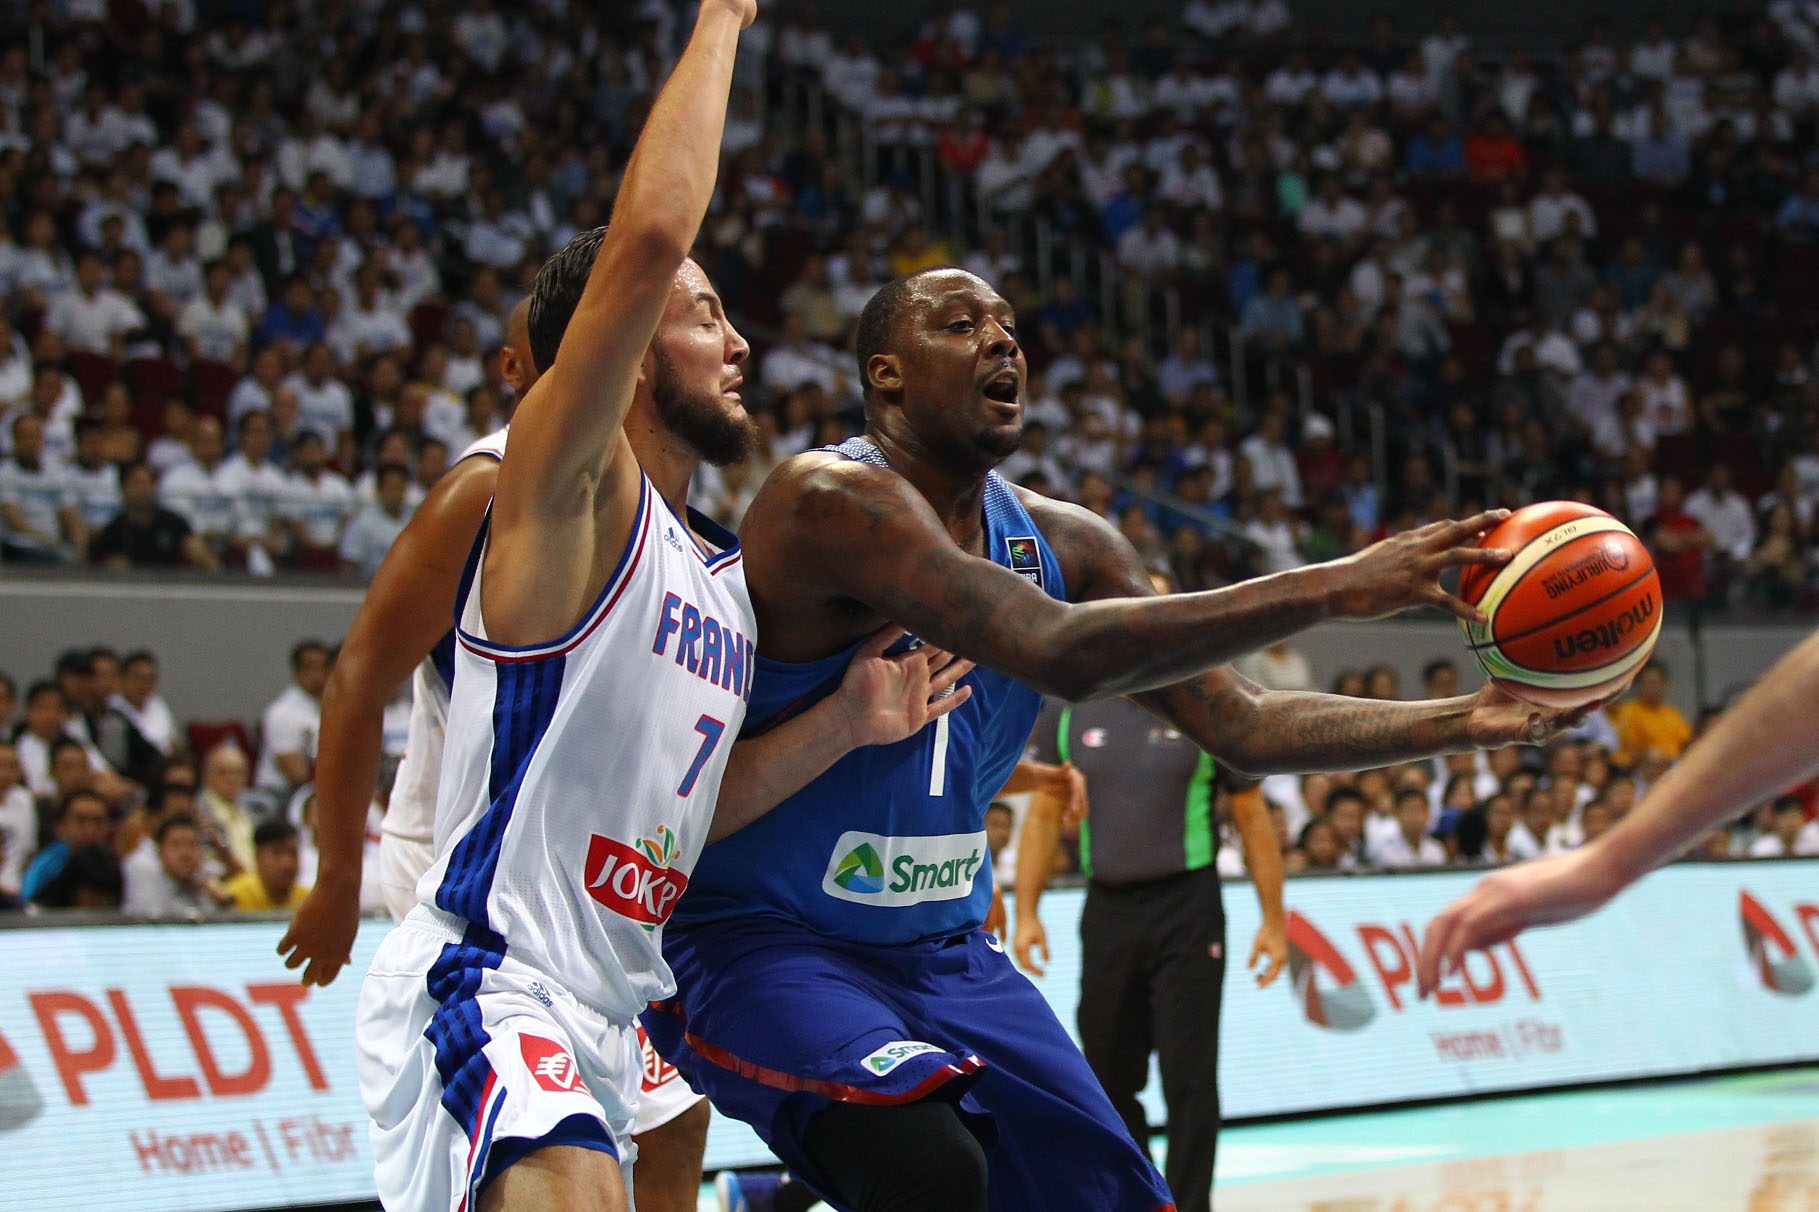 WATCH: Andray Blatche starts game off with thunderous dunk